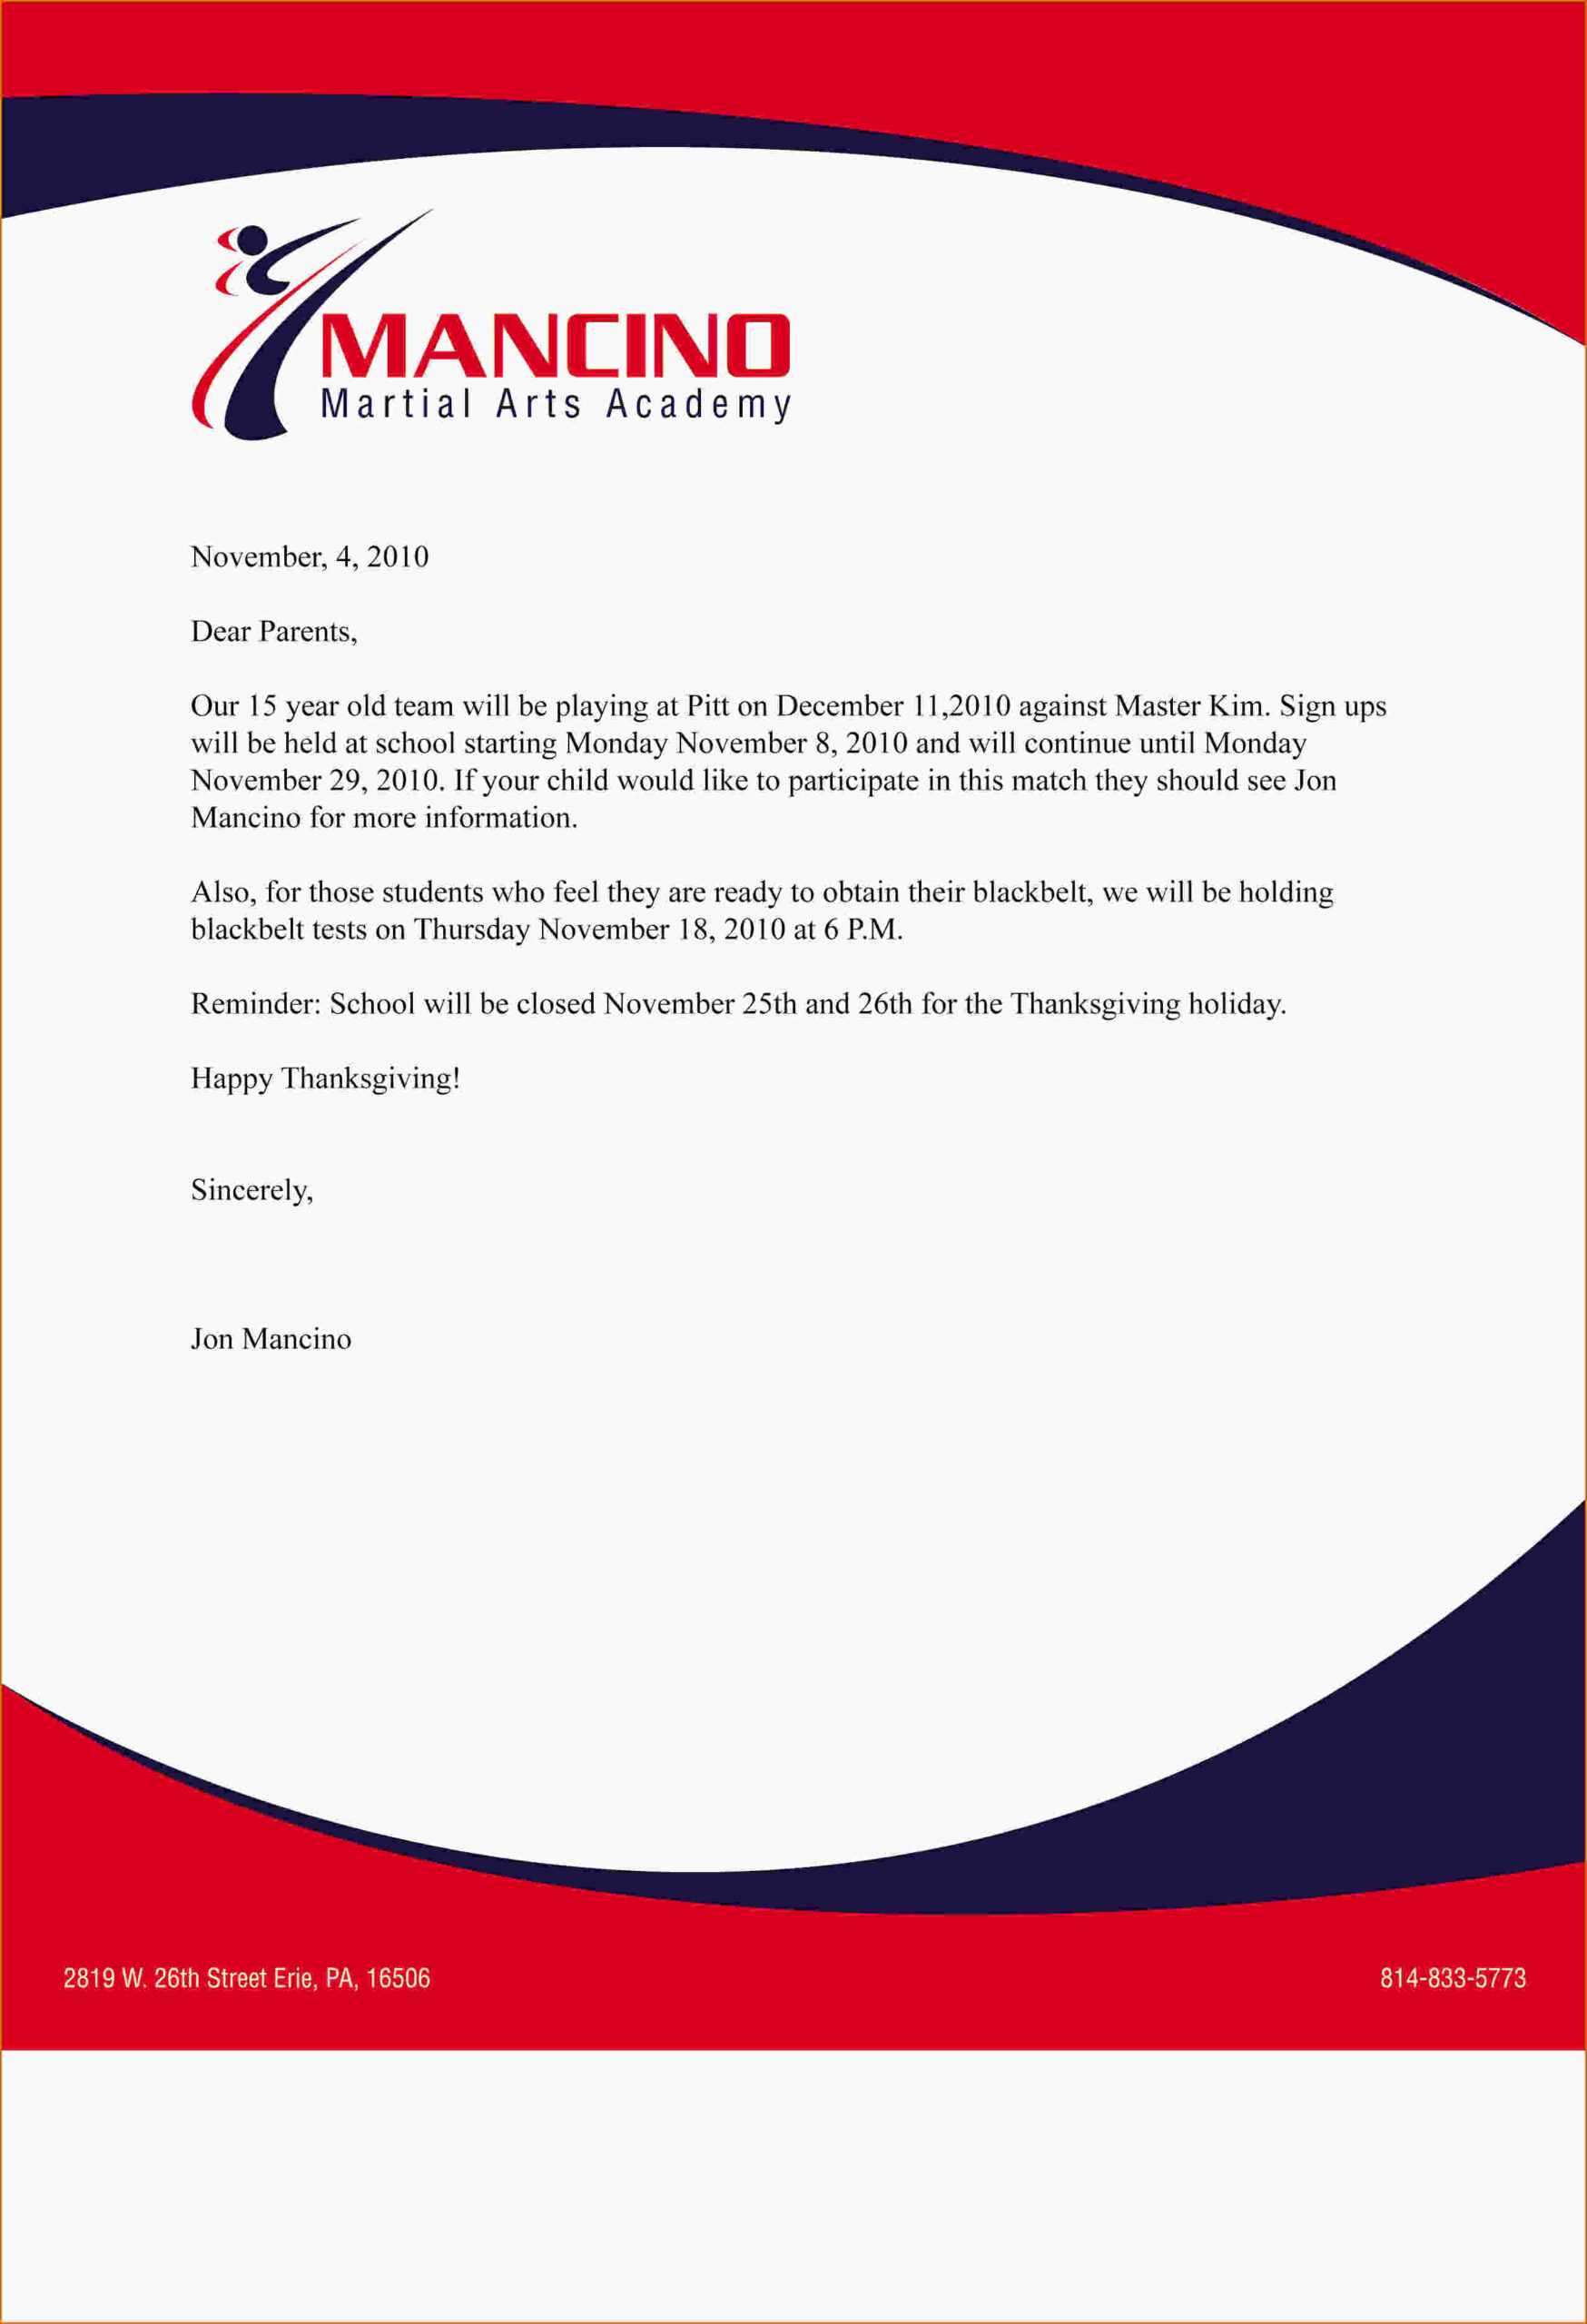 Business Letter Template With Letterhead.9 Basic Letterhead With Headed Letter Template Word